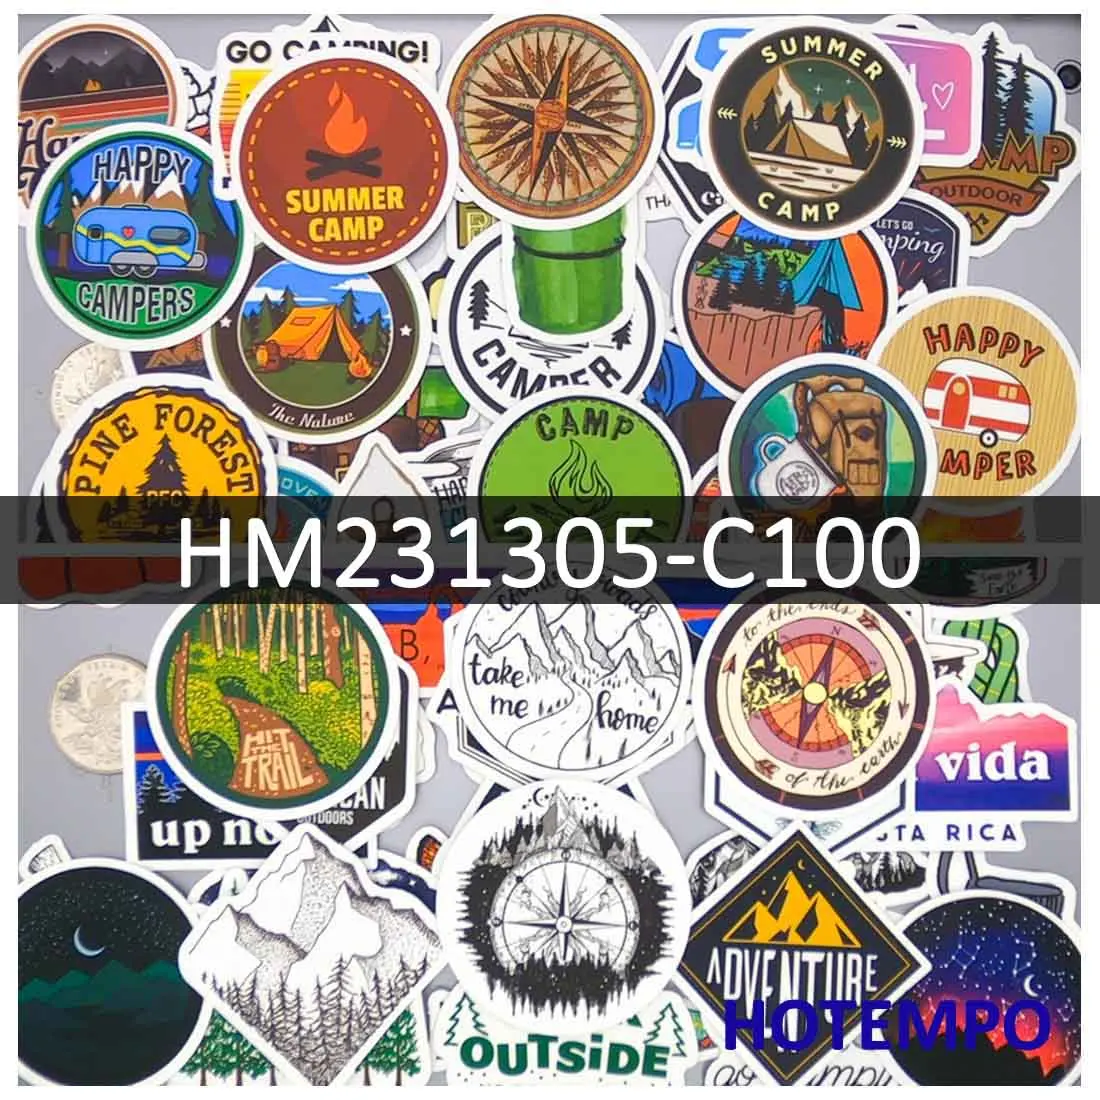 

50/100Pieces Explore Outdoor Hiking Camping Climbing Funny Travel Stickers for Motorcycle Car Bike Luggage Phone Laptop Sticker